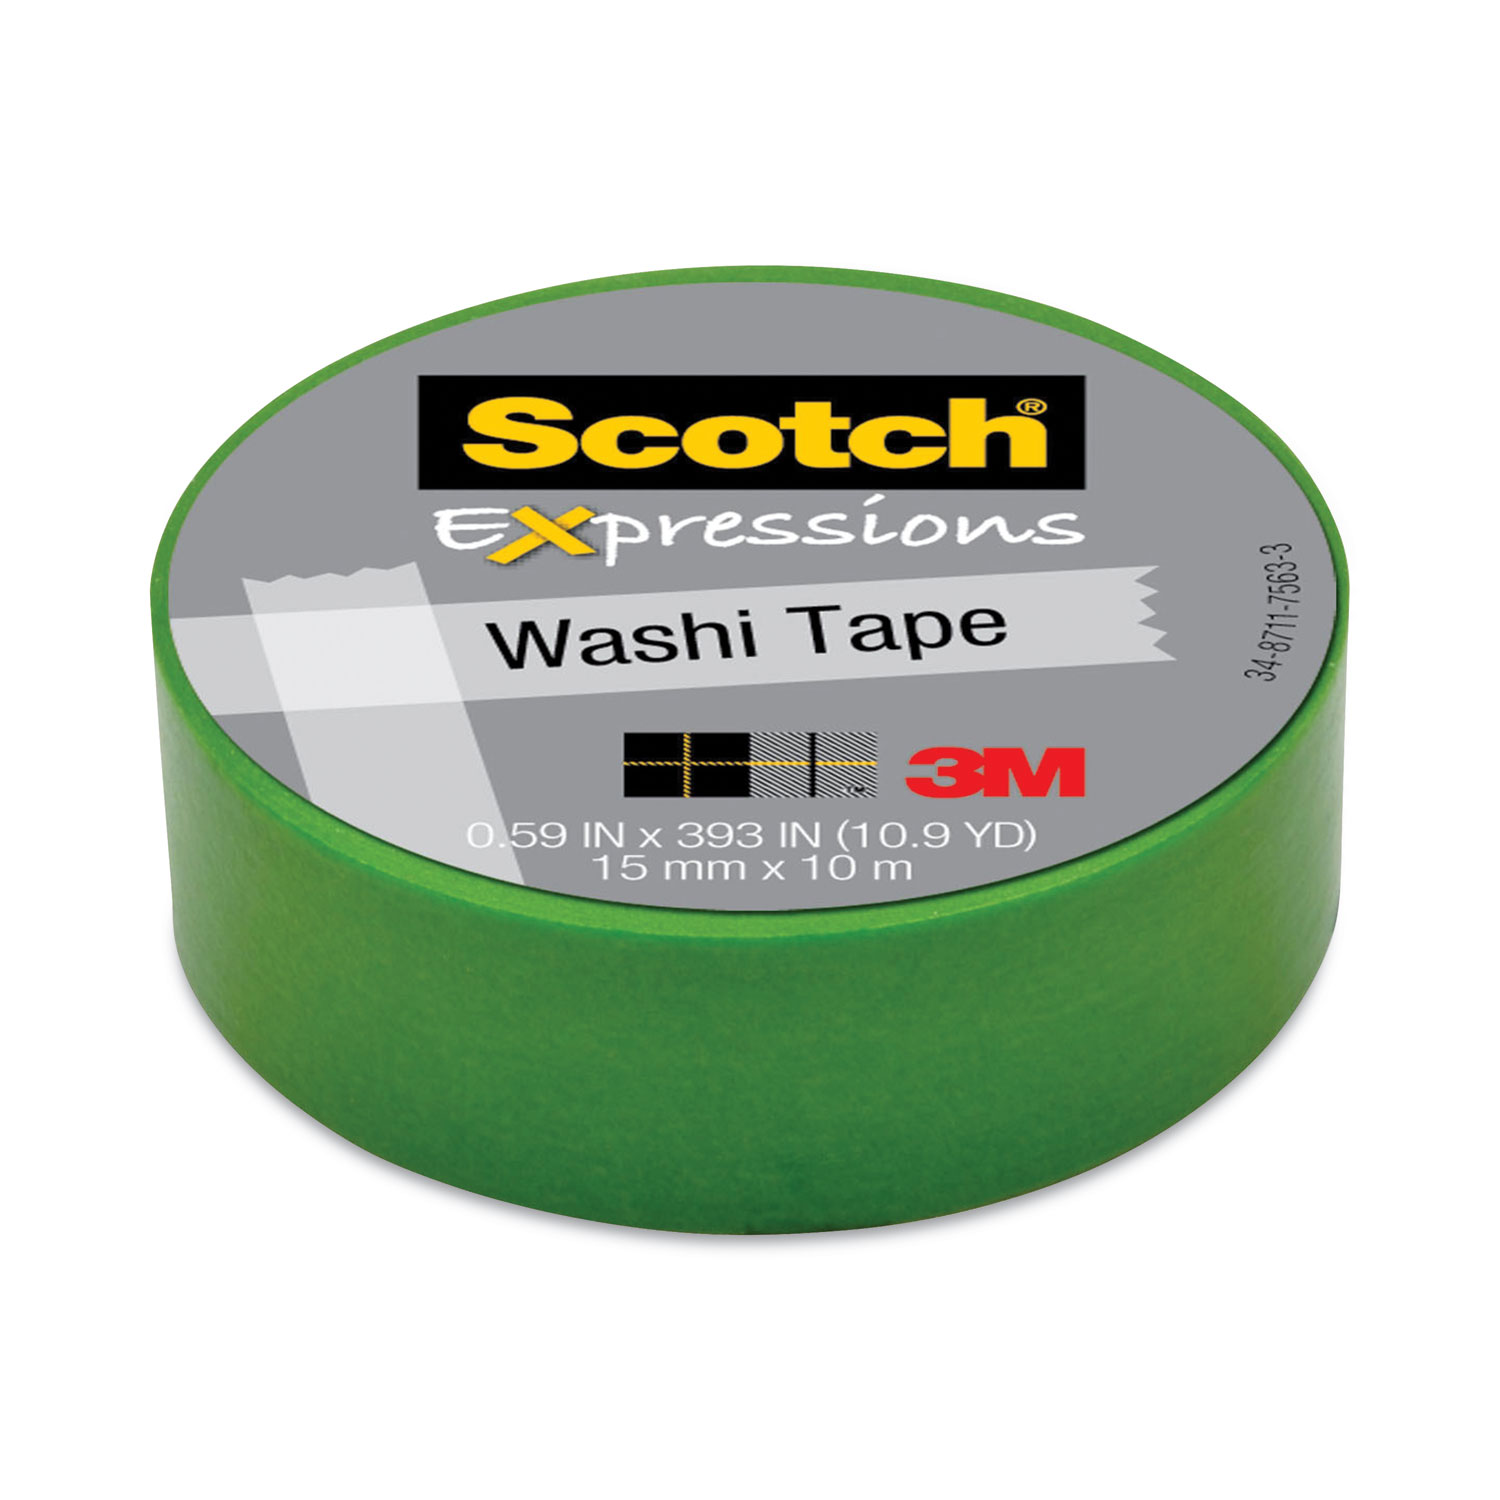 Scotch Expressions Masking Tape, .94 x 20 yds, Primary Green by Scotch - 3